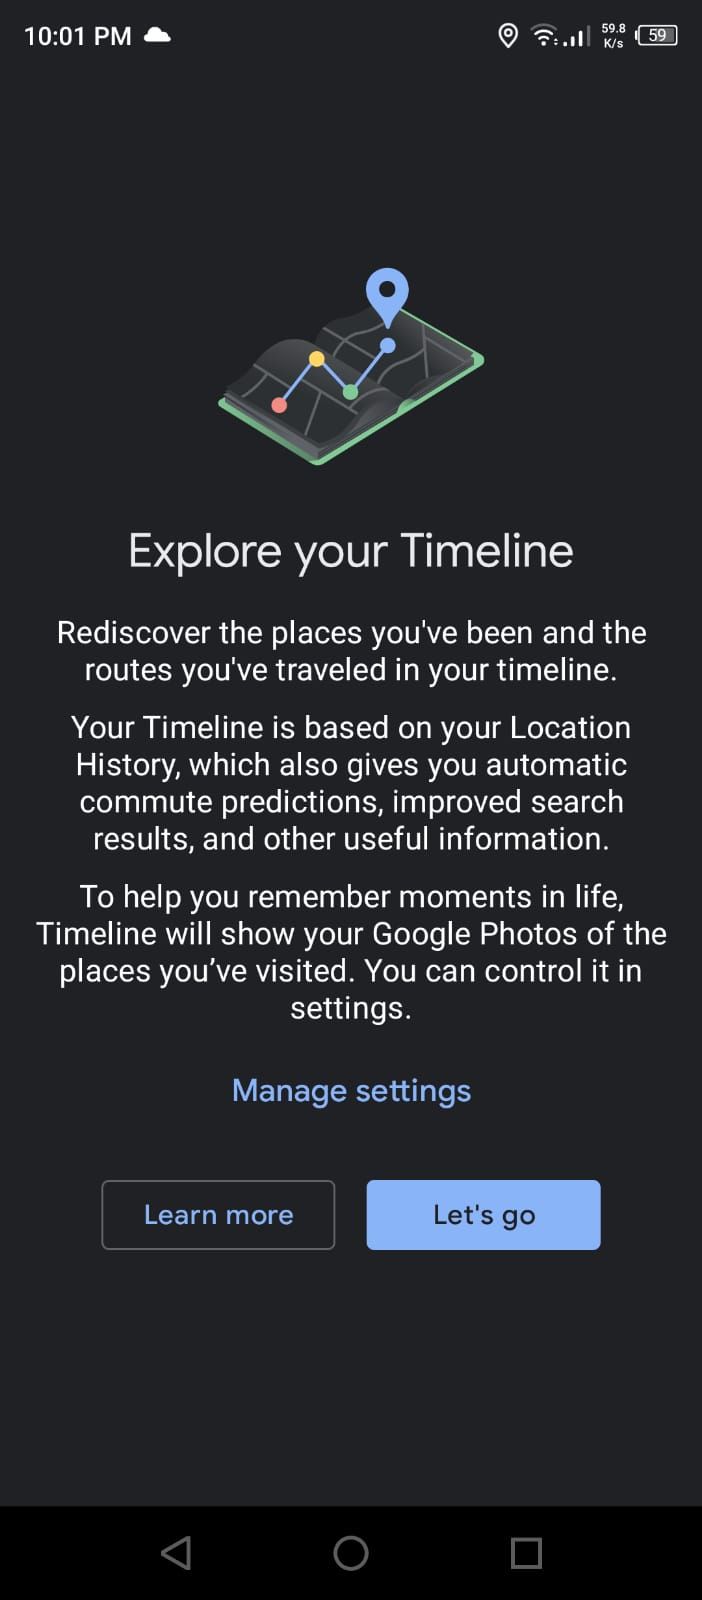 Timeline Welcome Screen in the Google Maps App